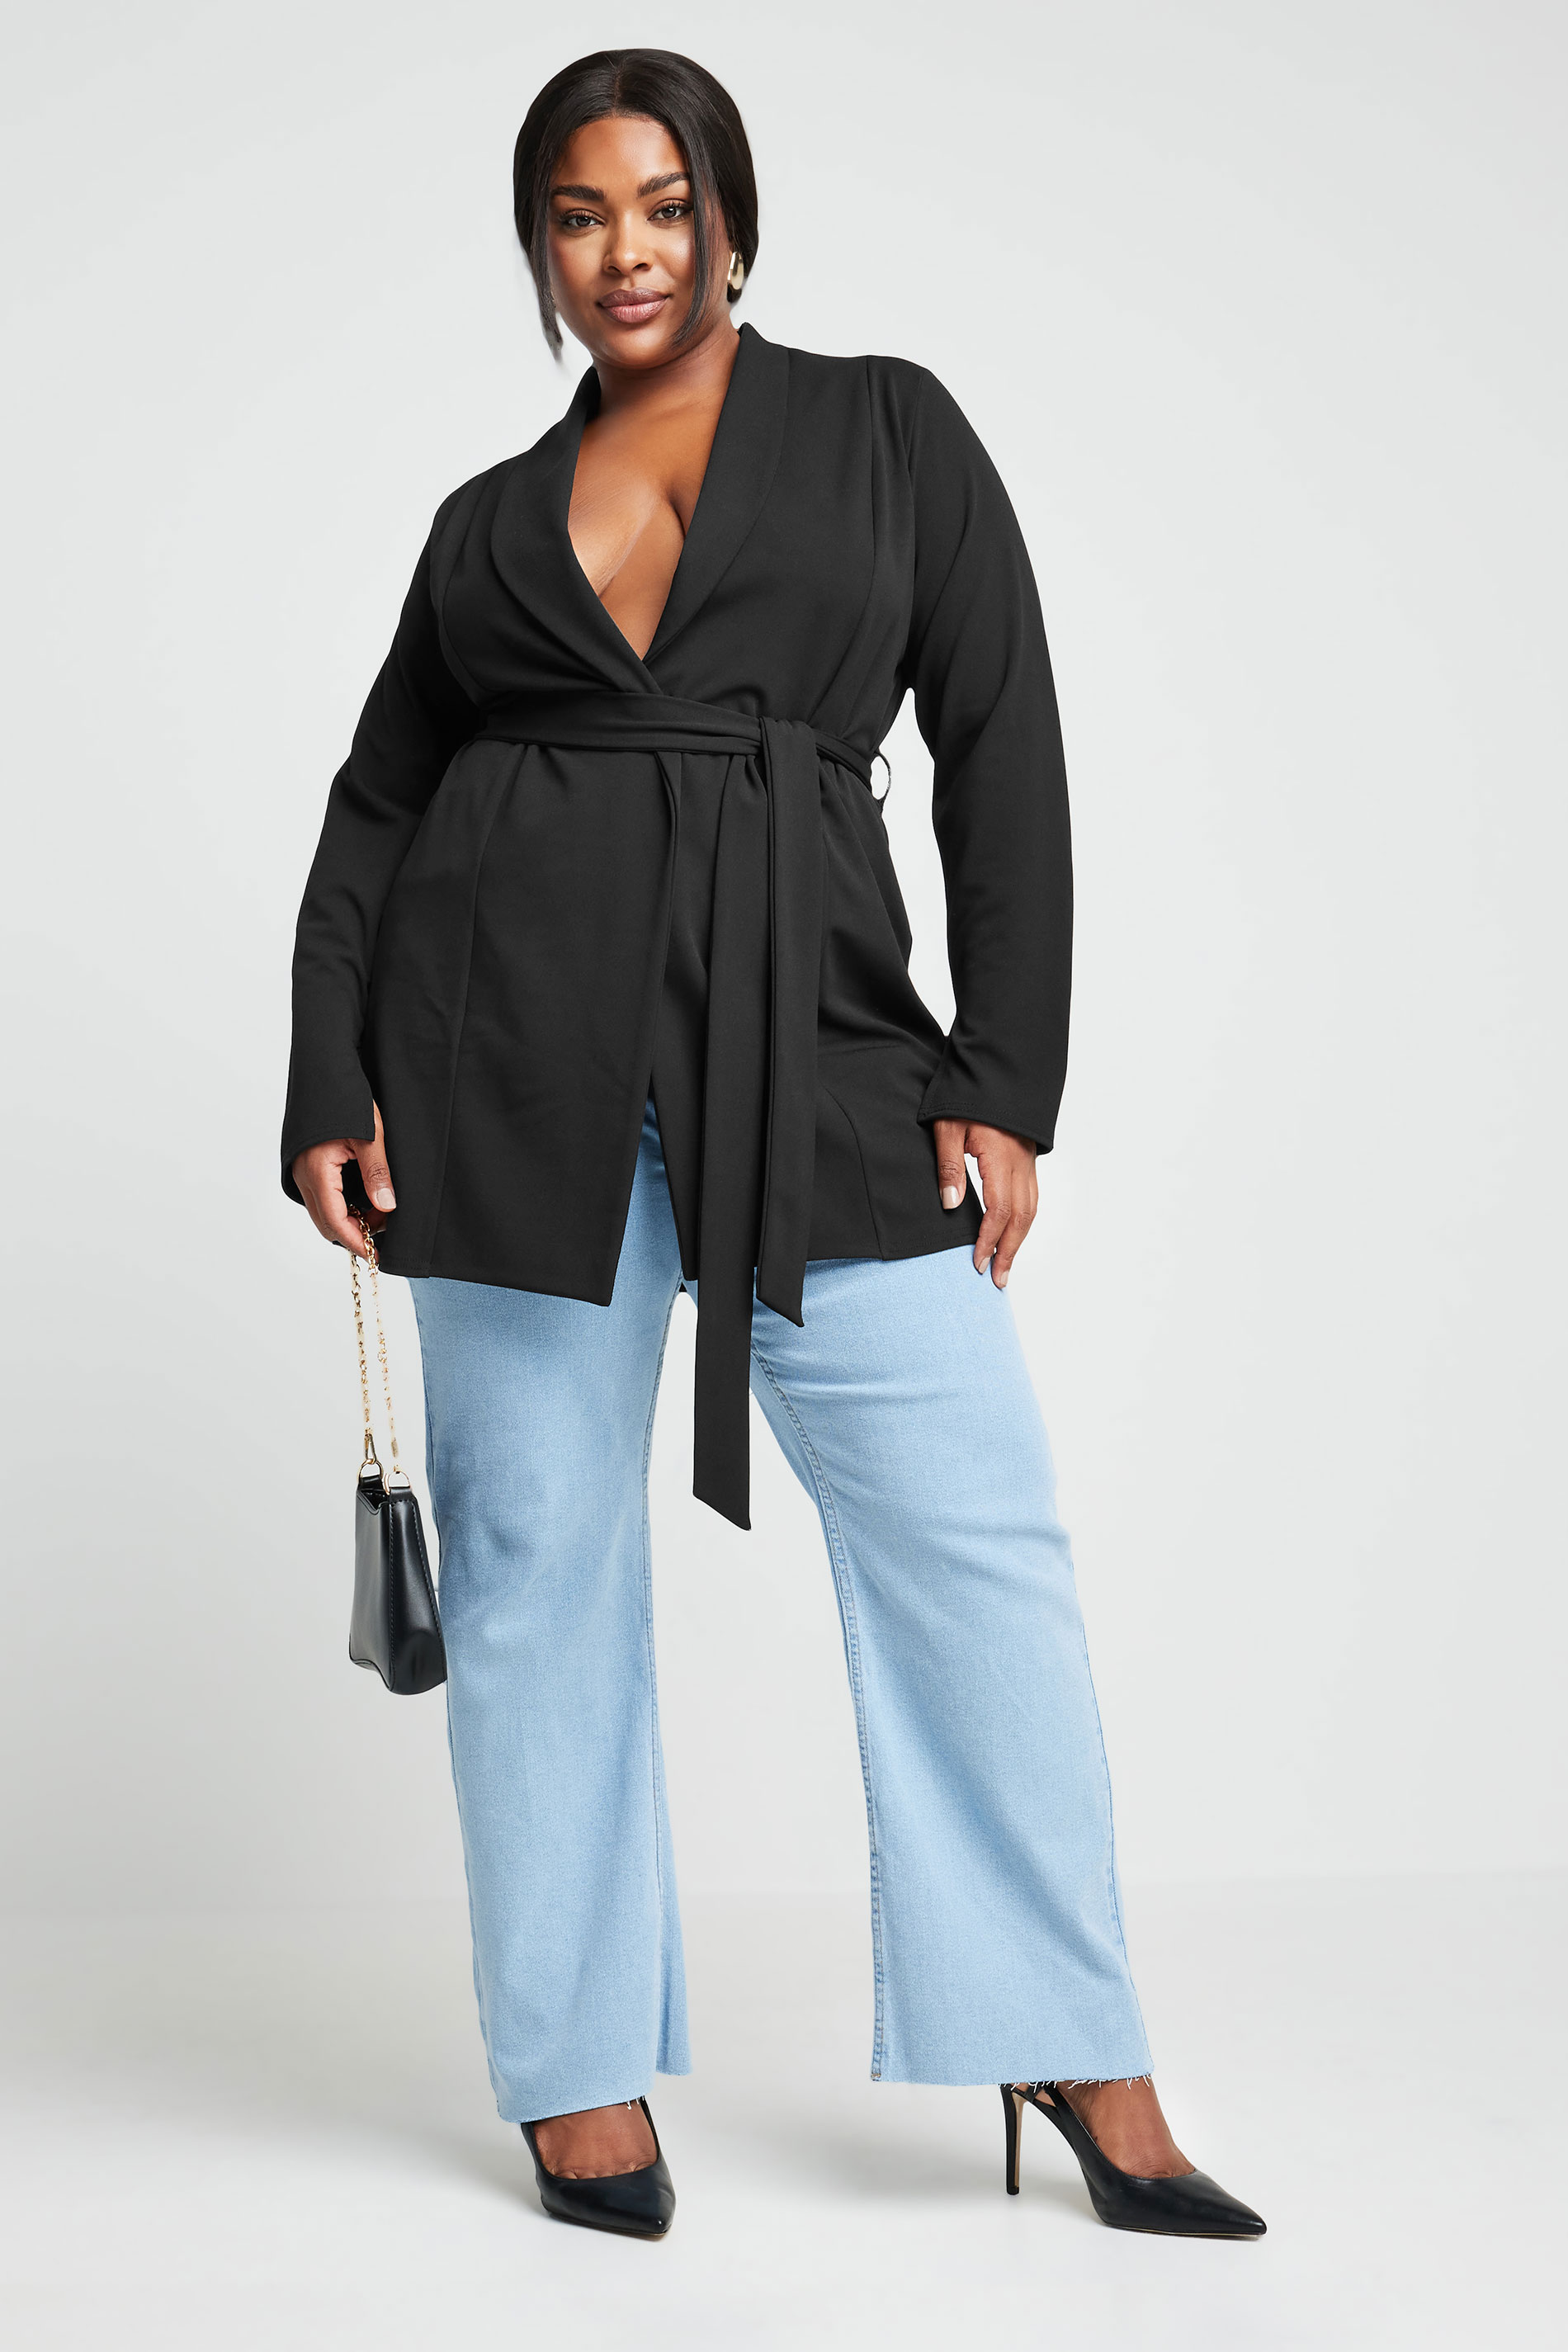 LIMITED COLLECTION Plus Size Black Blazer | Yours Clothing 2